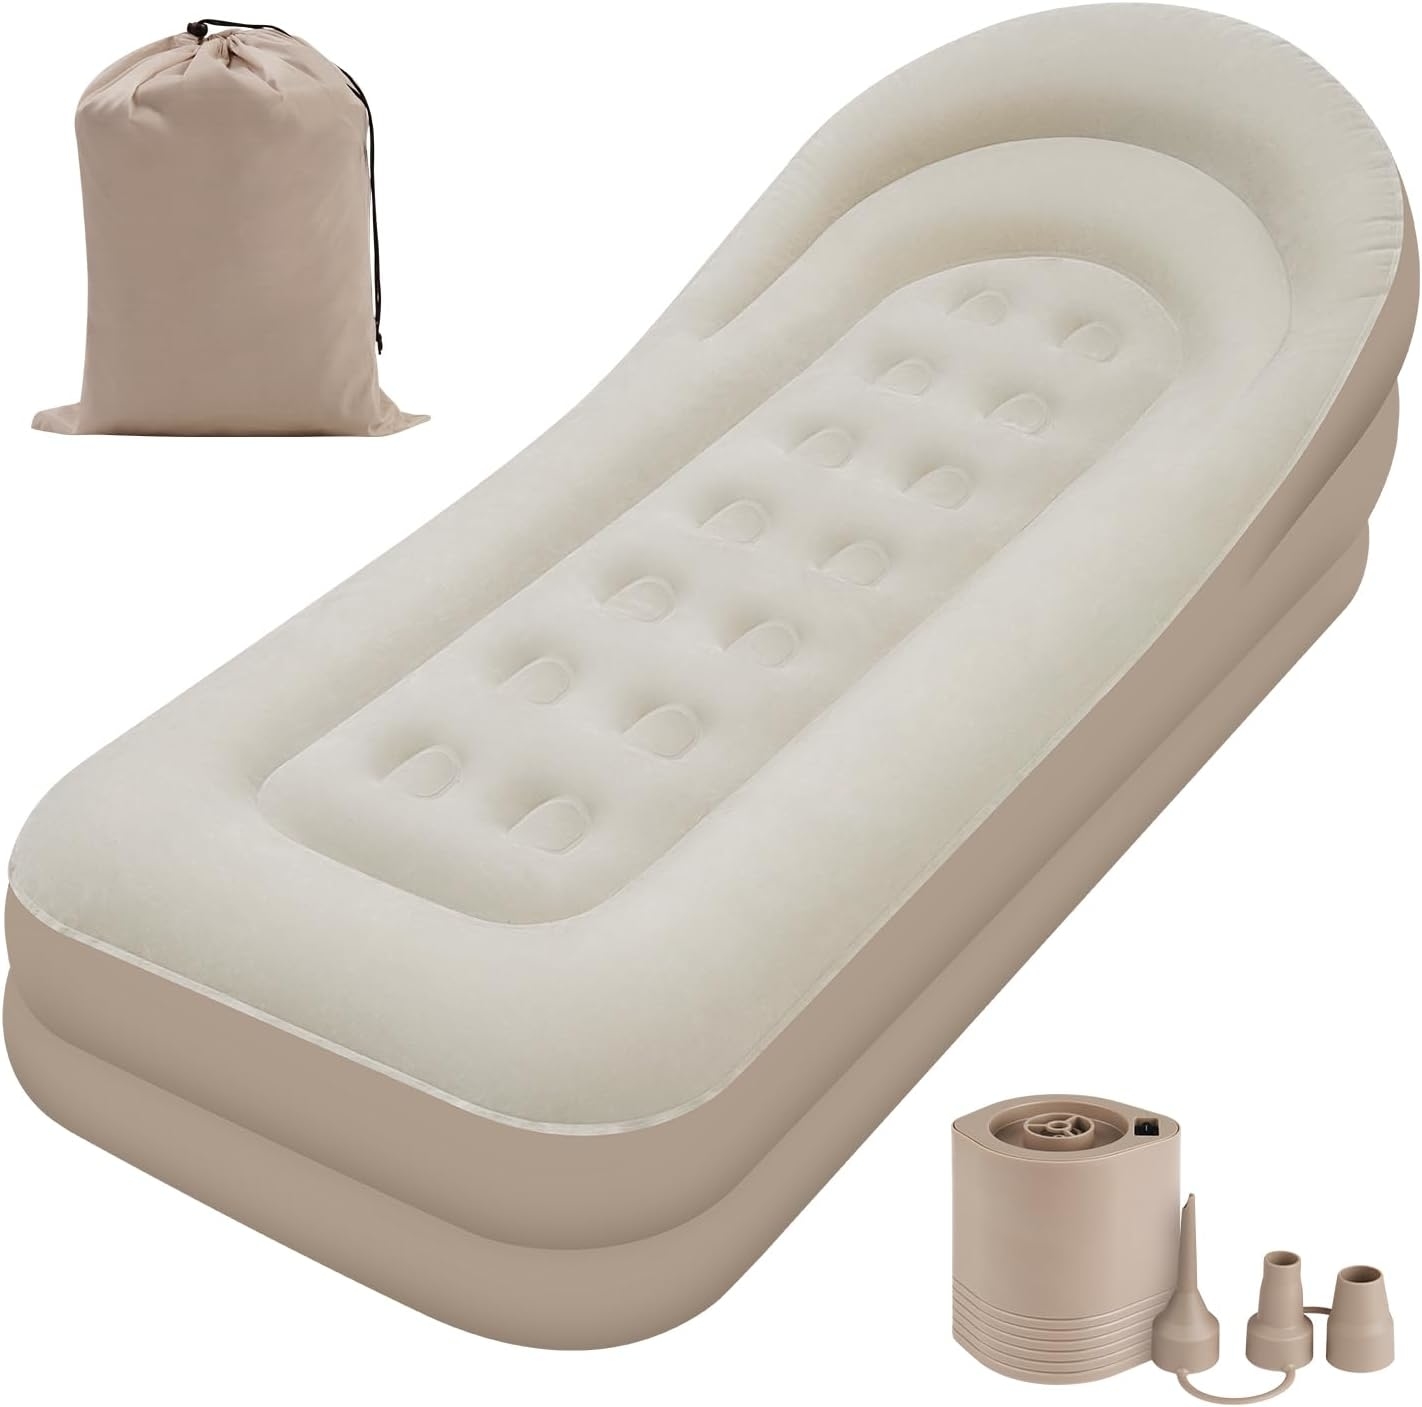 Inflatable air mattress with a built-in pillow, pump, and a storage bag. Ideal for camping or home use